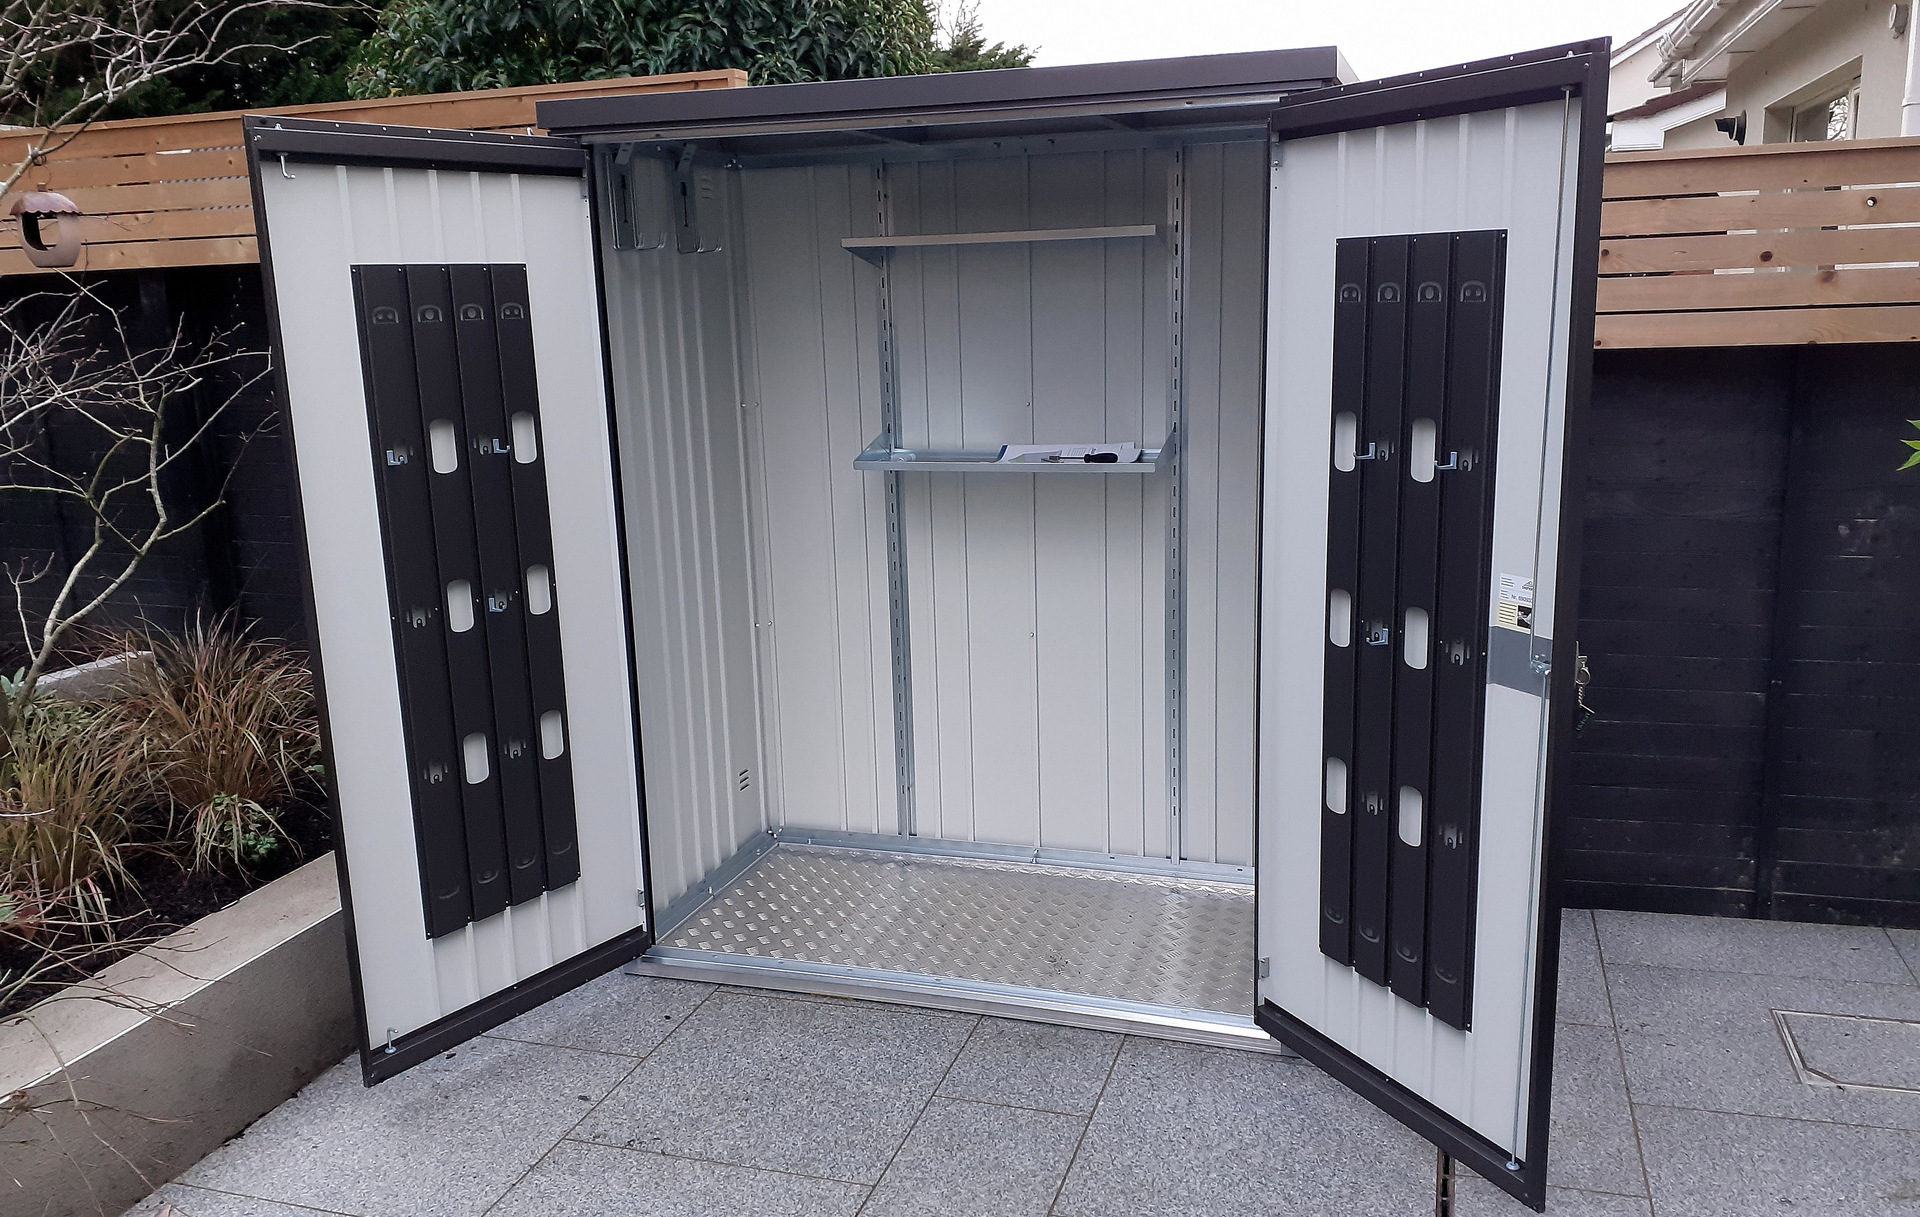 The superb quality and style of the Biohort Equipment Locker 150 in metallic dark grey  with optional accessories including aluminium floor frame, aluminium floor panels | supplied + installed in Castleknock by Owen Chubb Landscapers. Tel 087-2306 128.